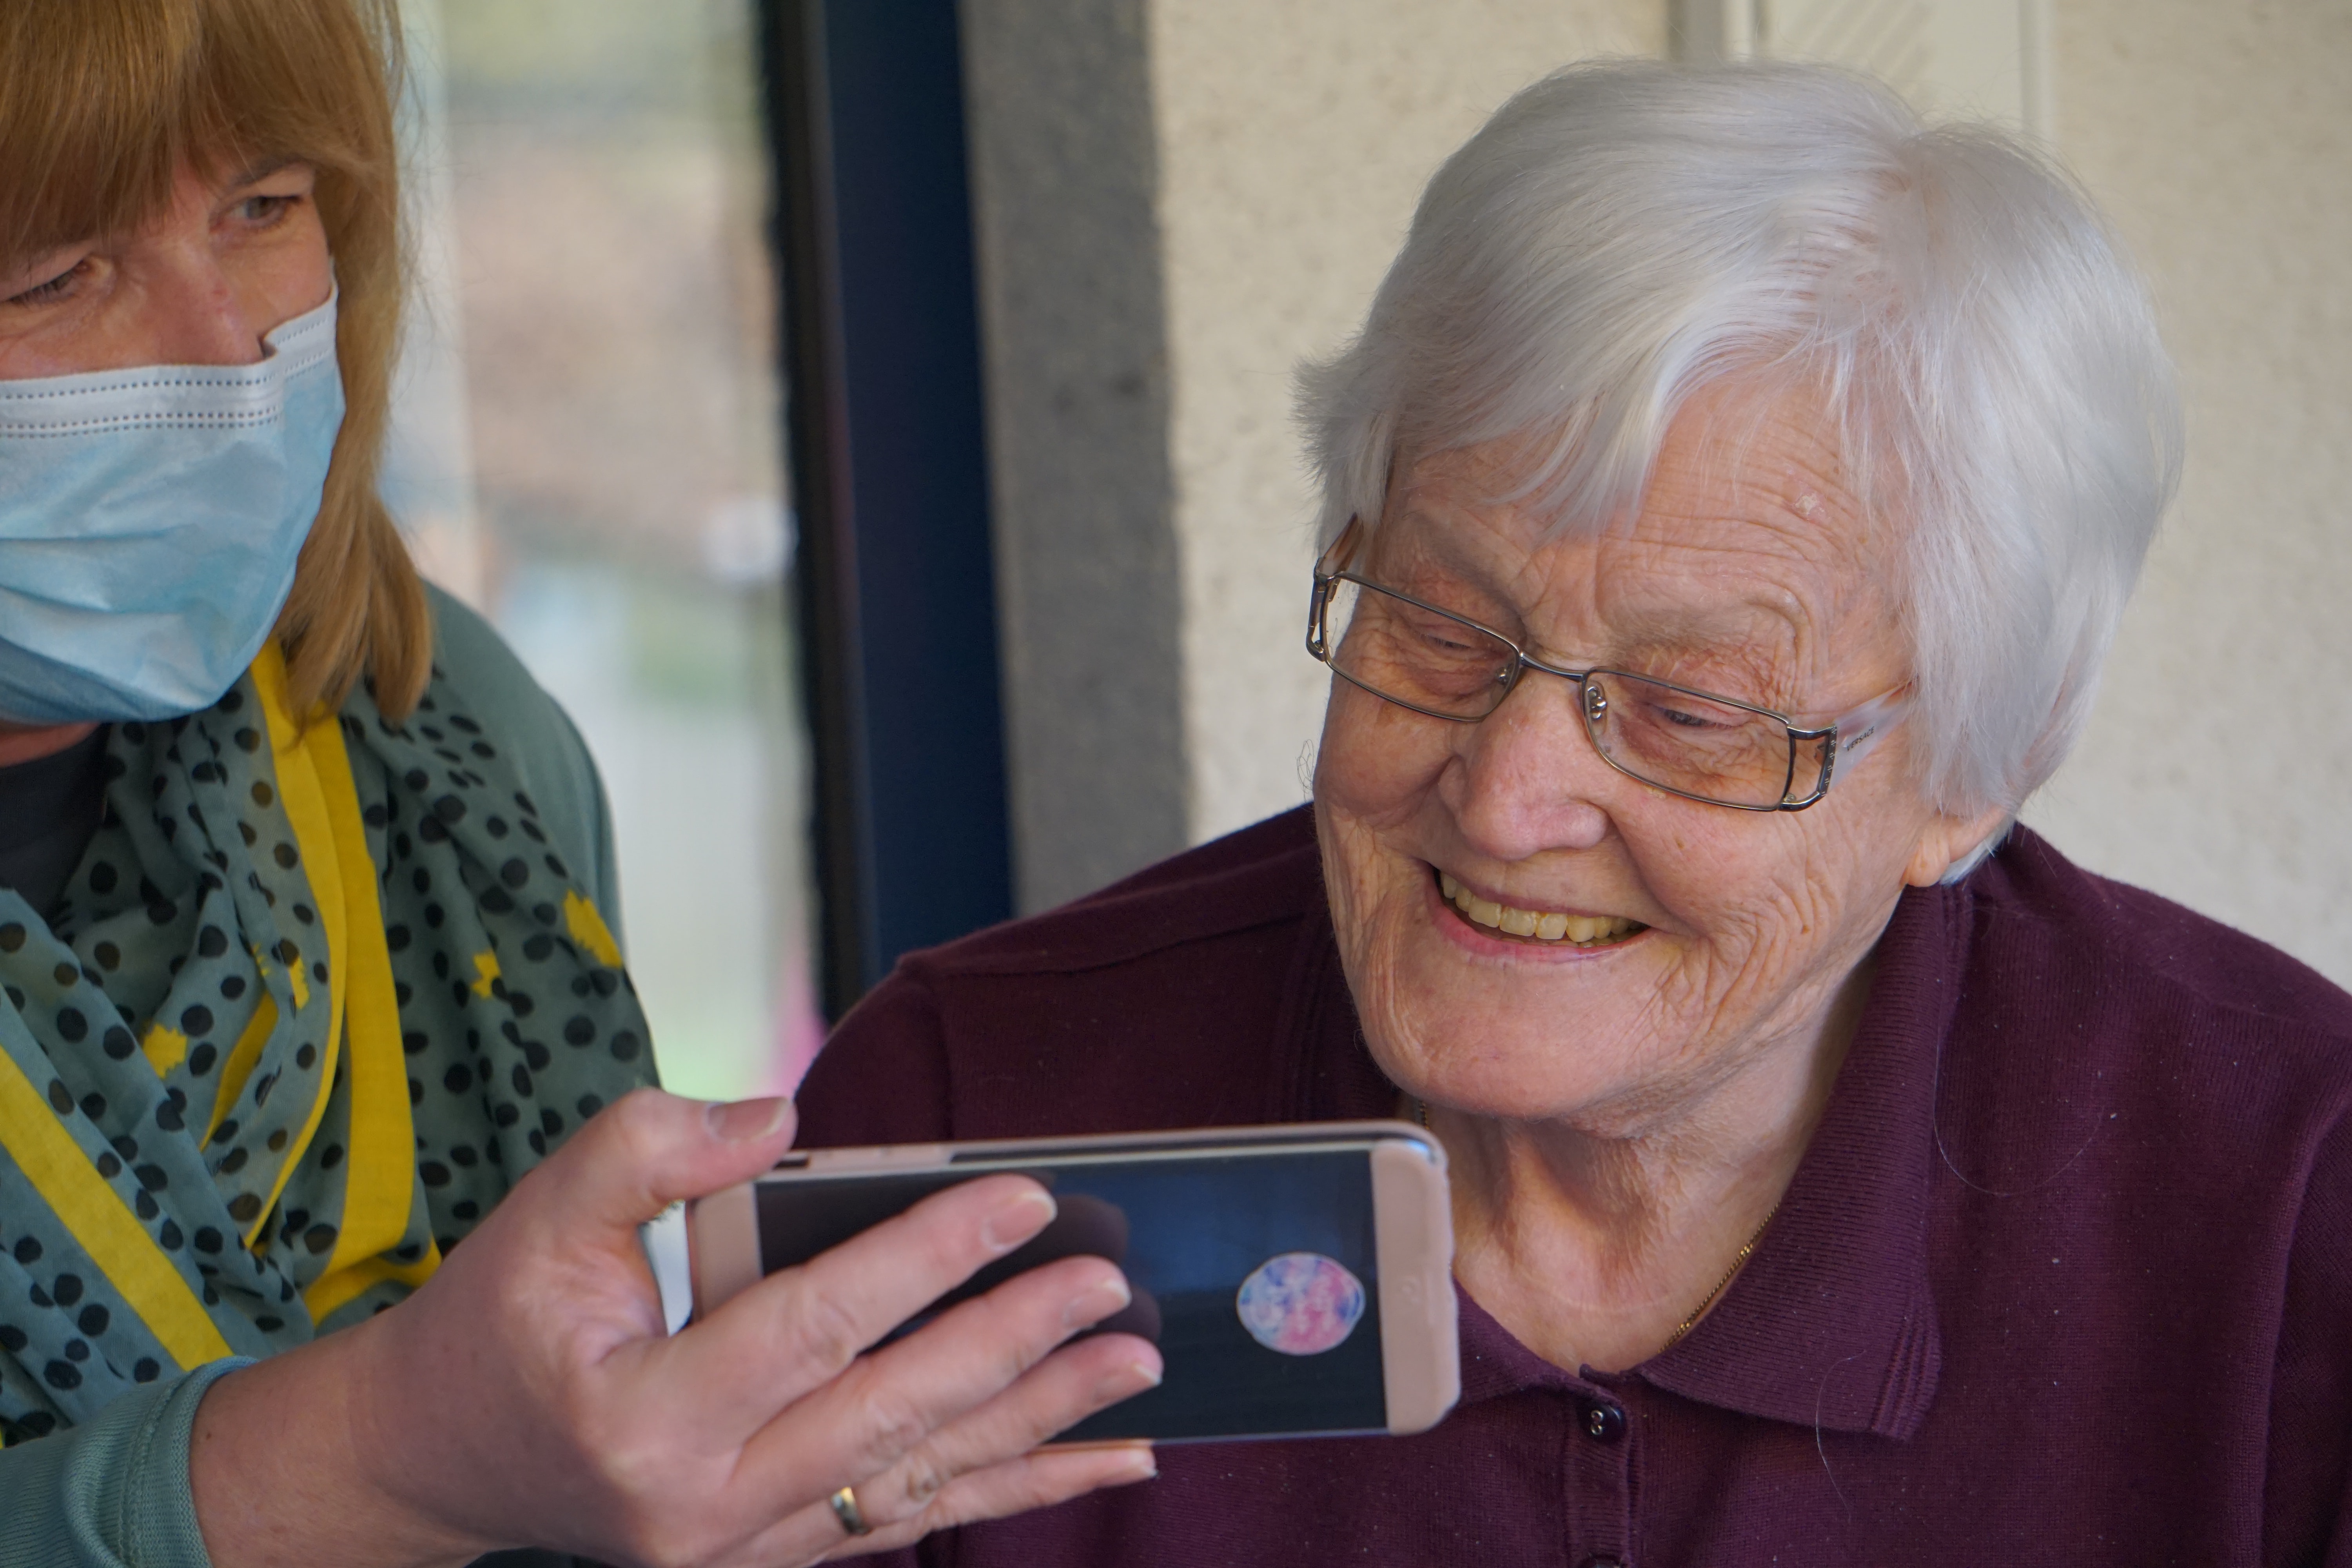 One lady showing something on her cell to another old lady